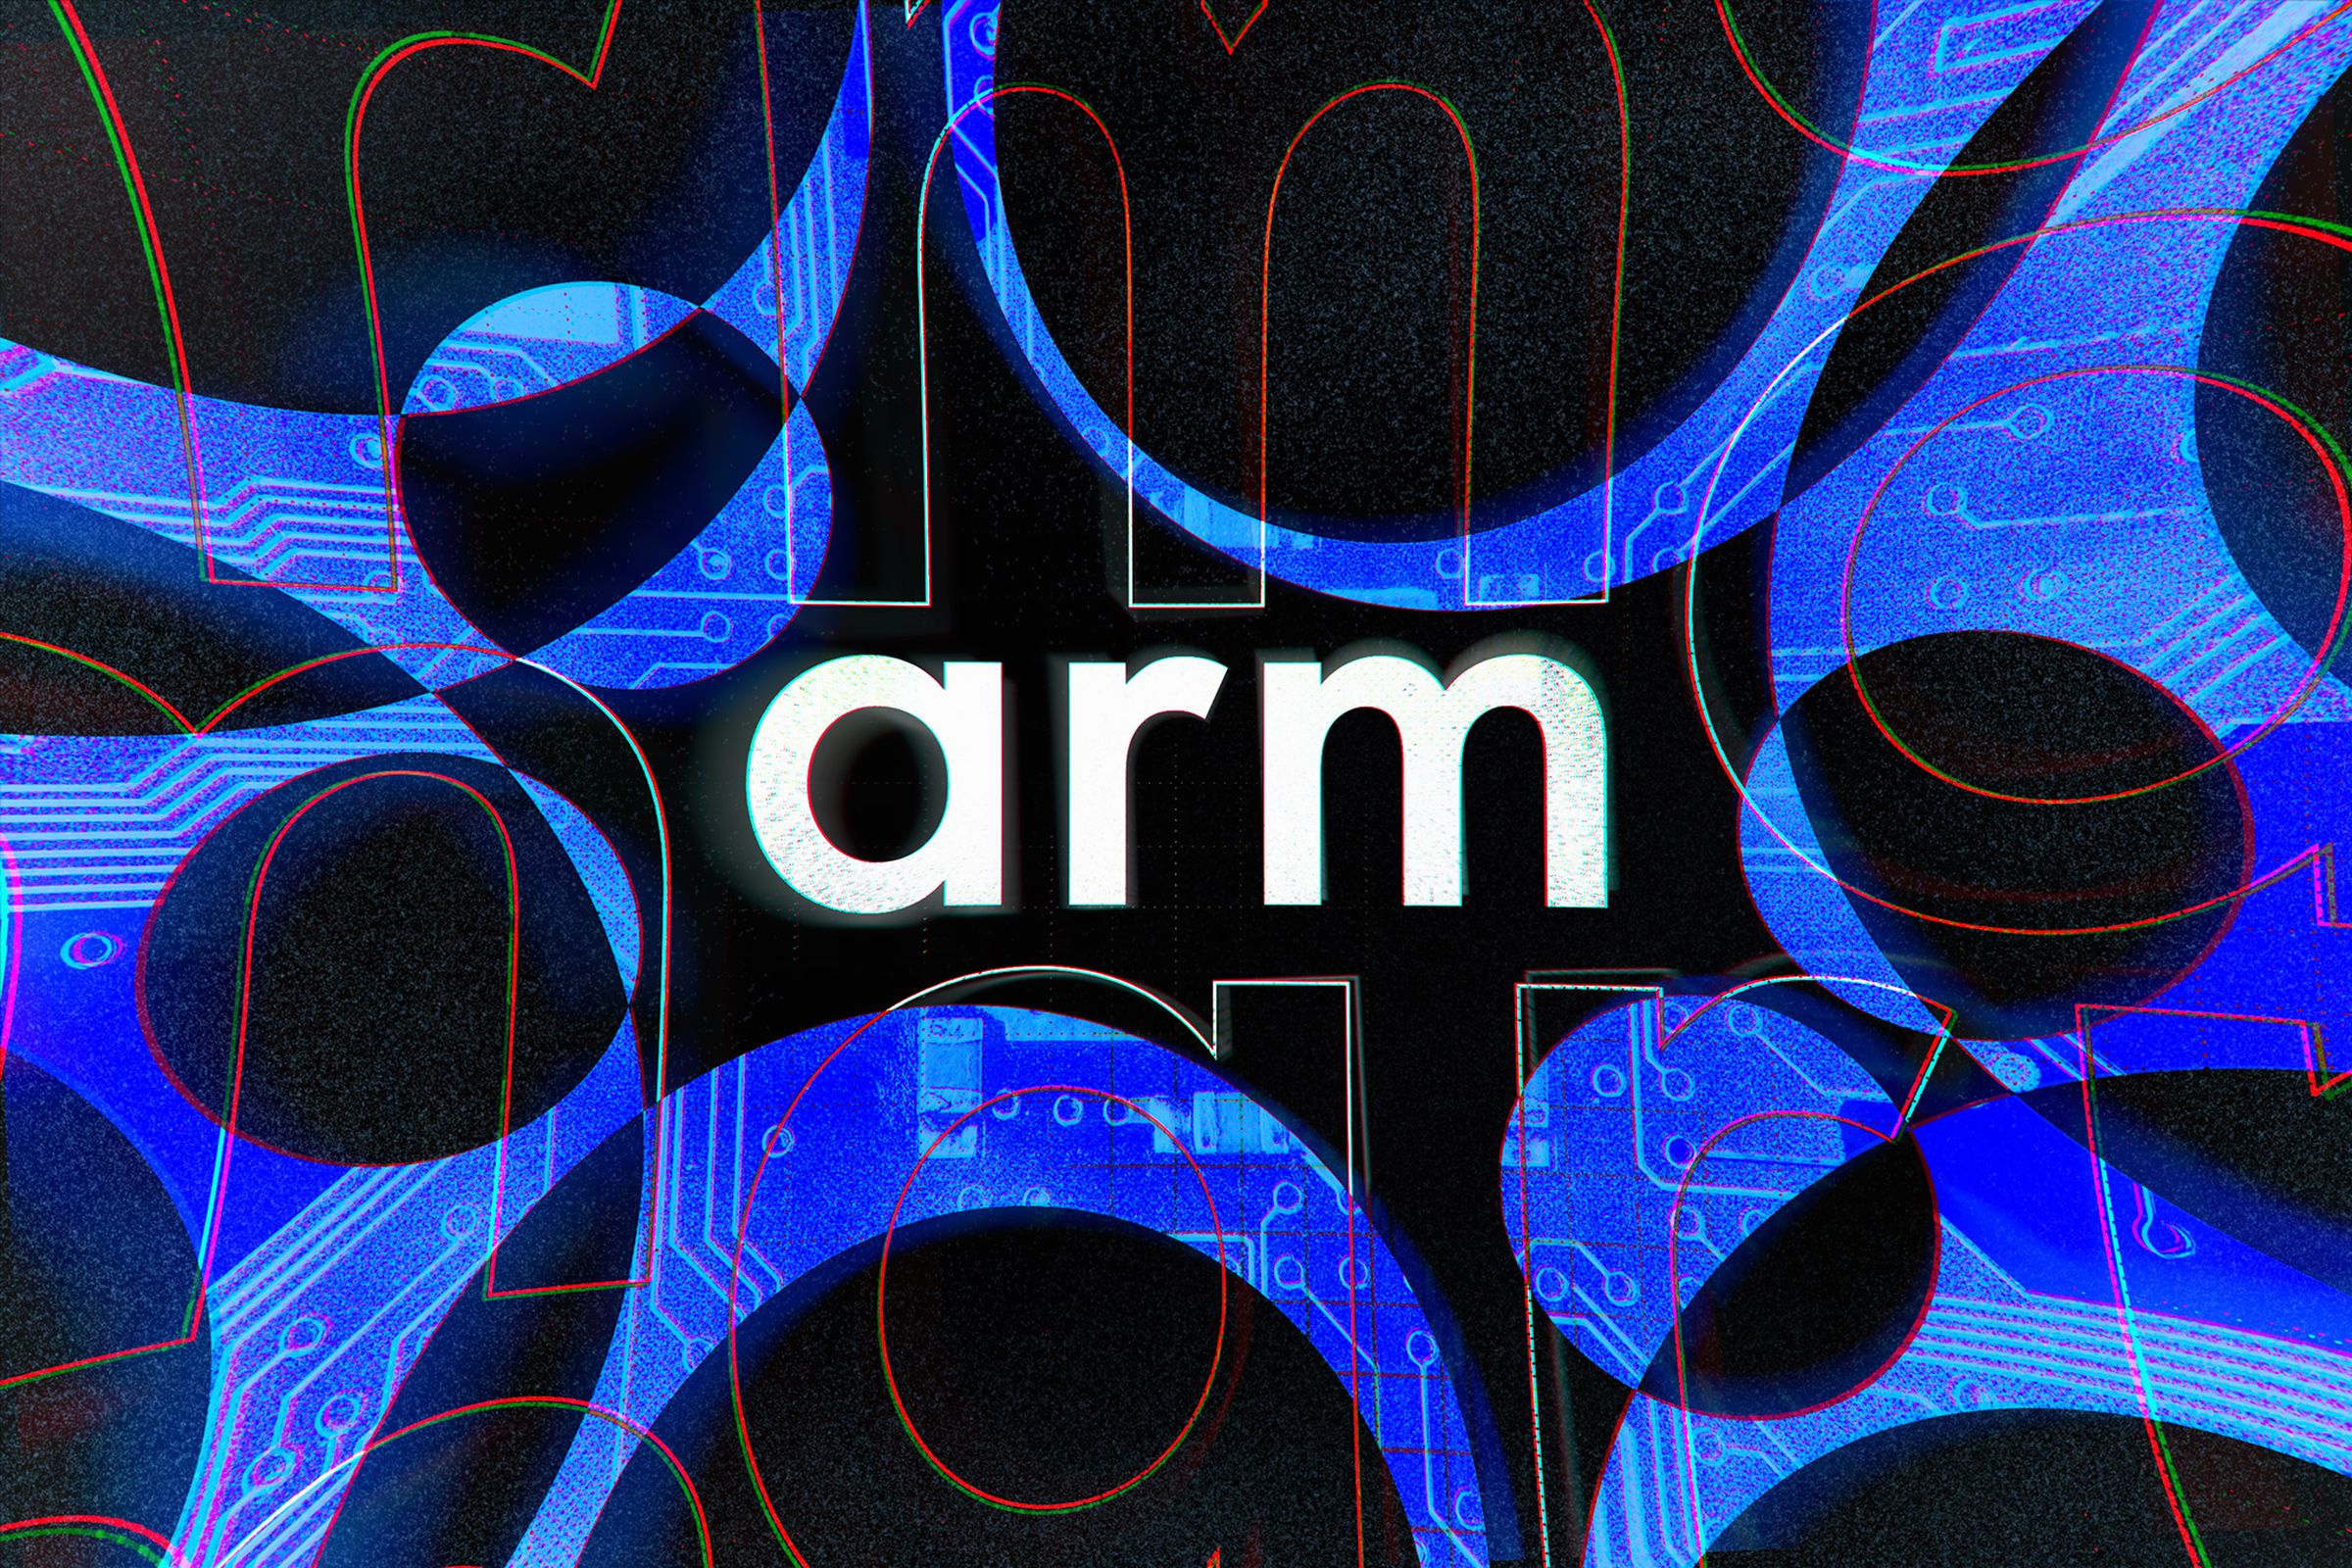 The word “arm” is superimposed on a psychedelic background